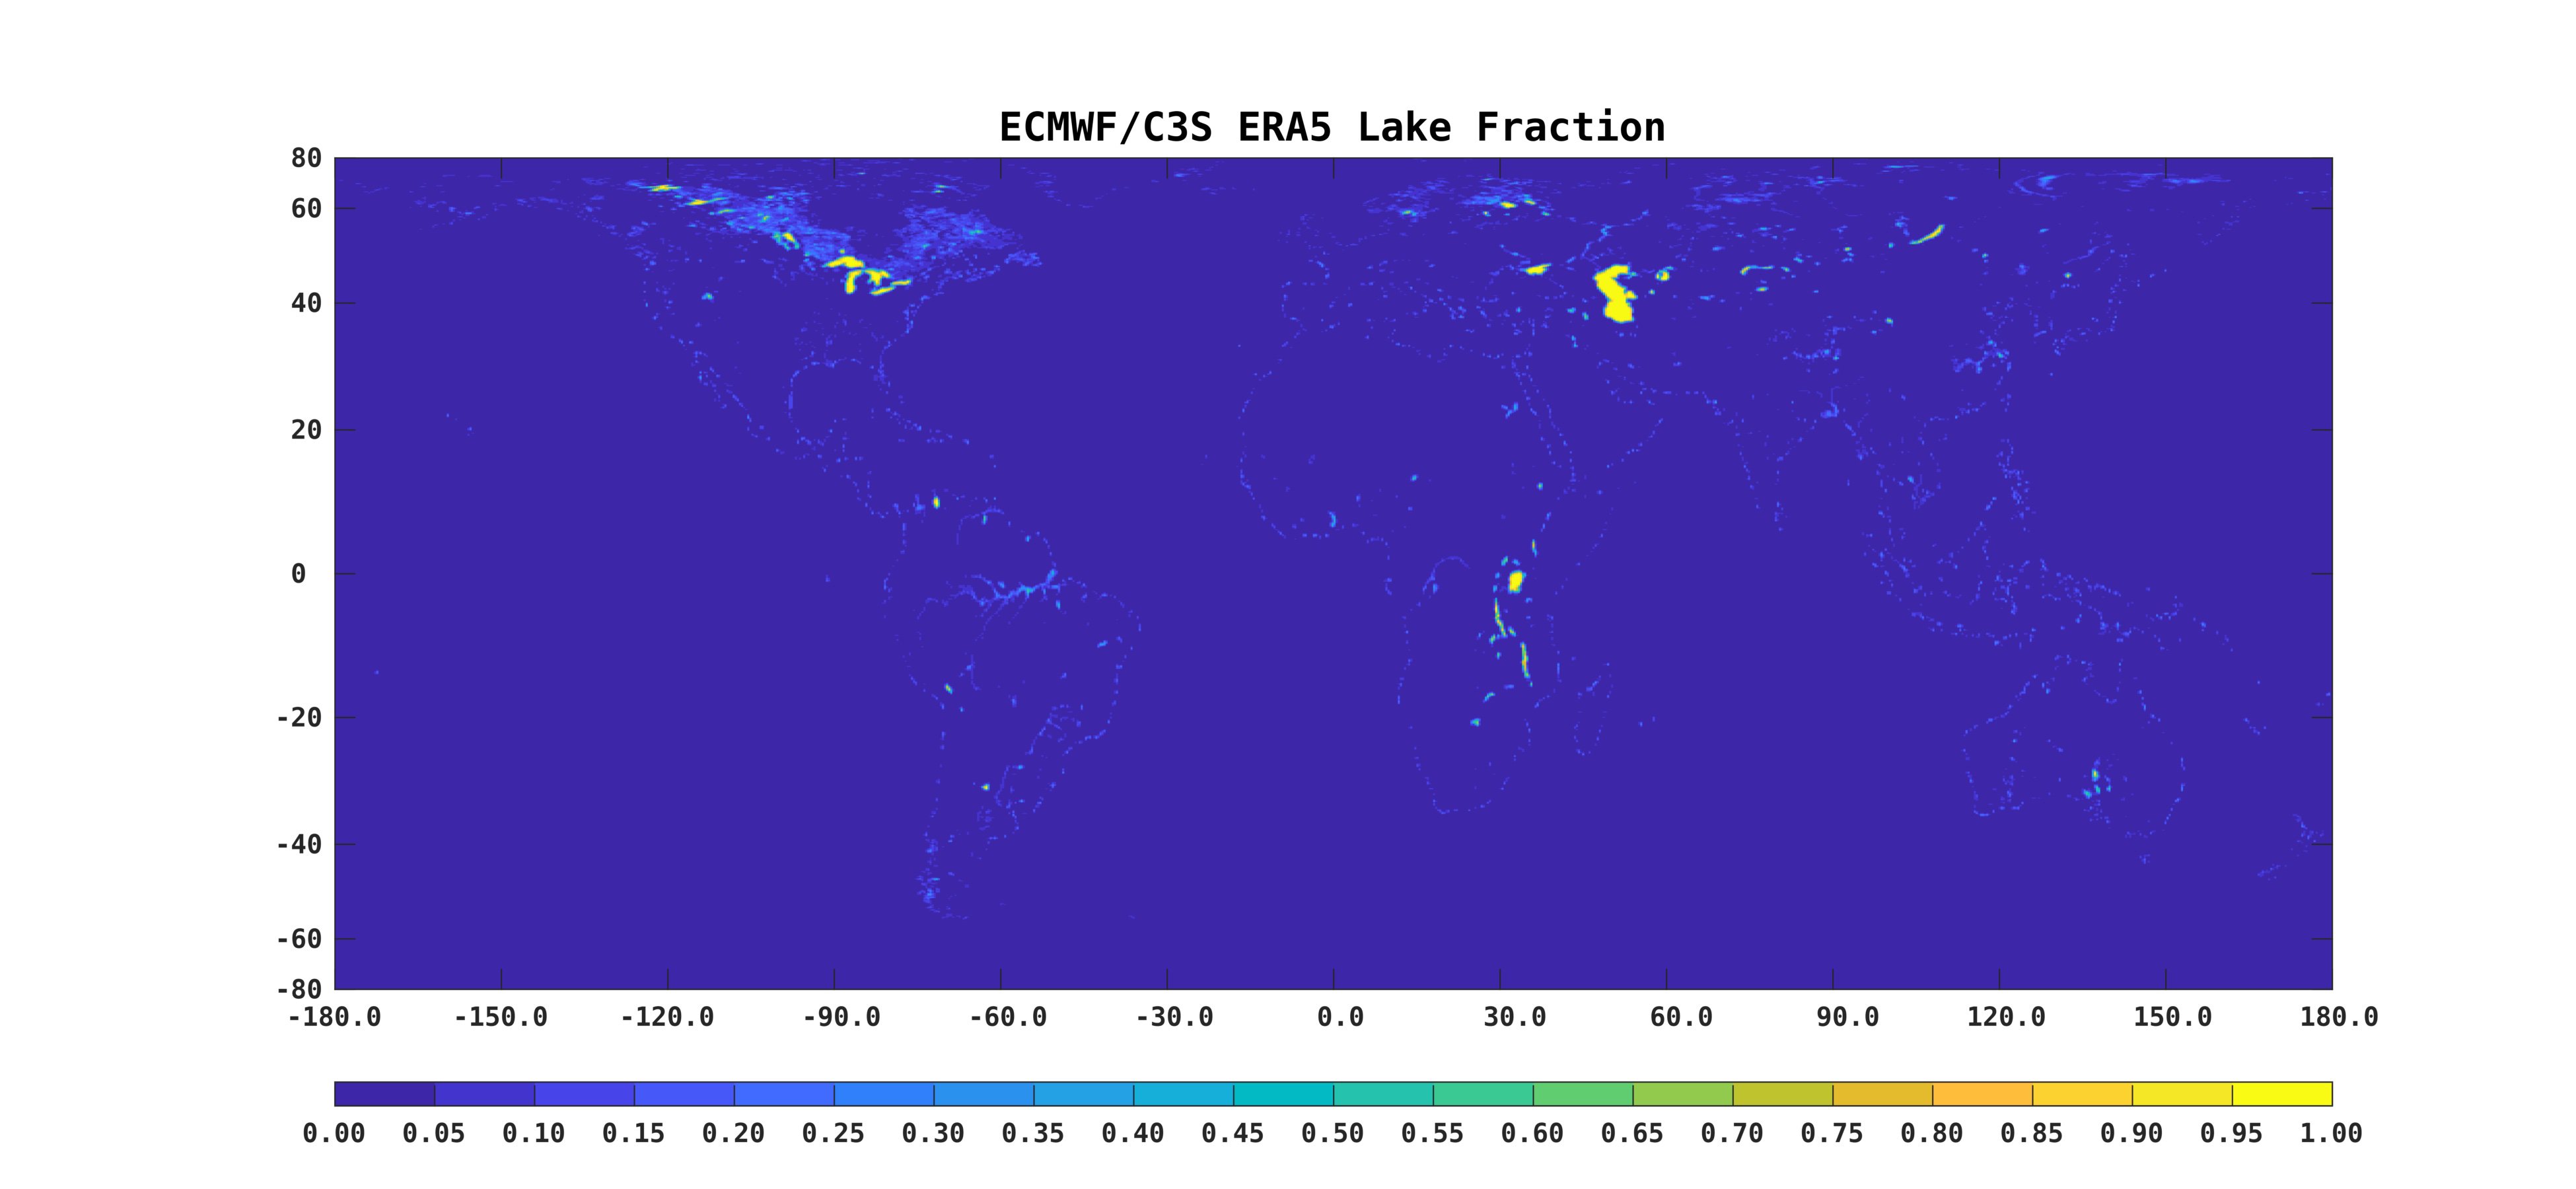 Lake cover fraction